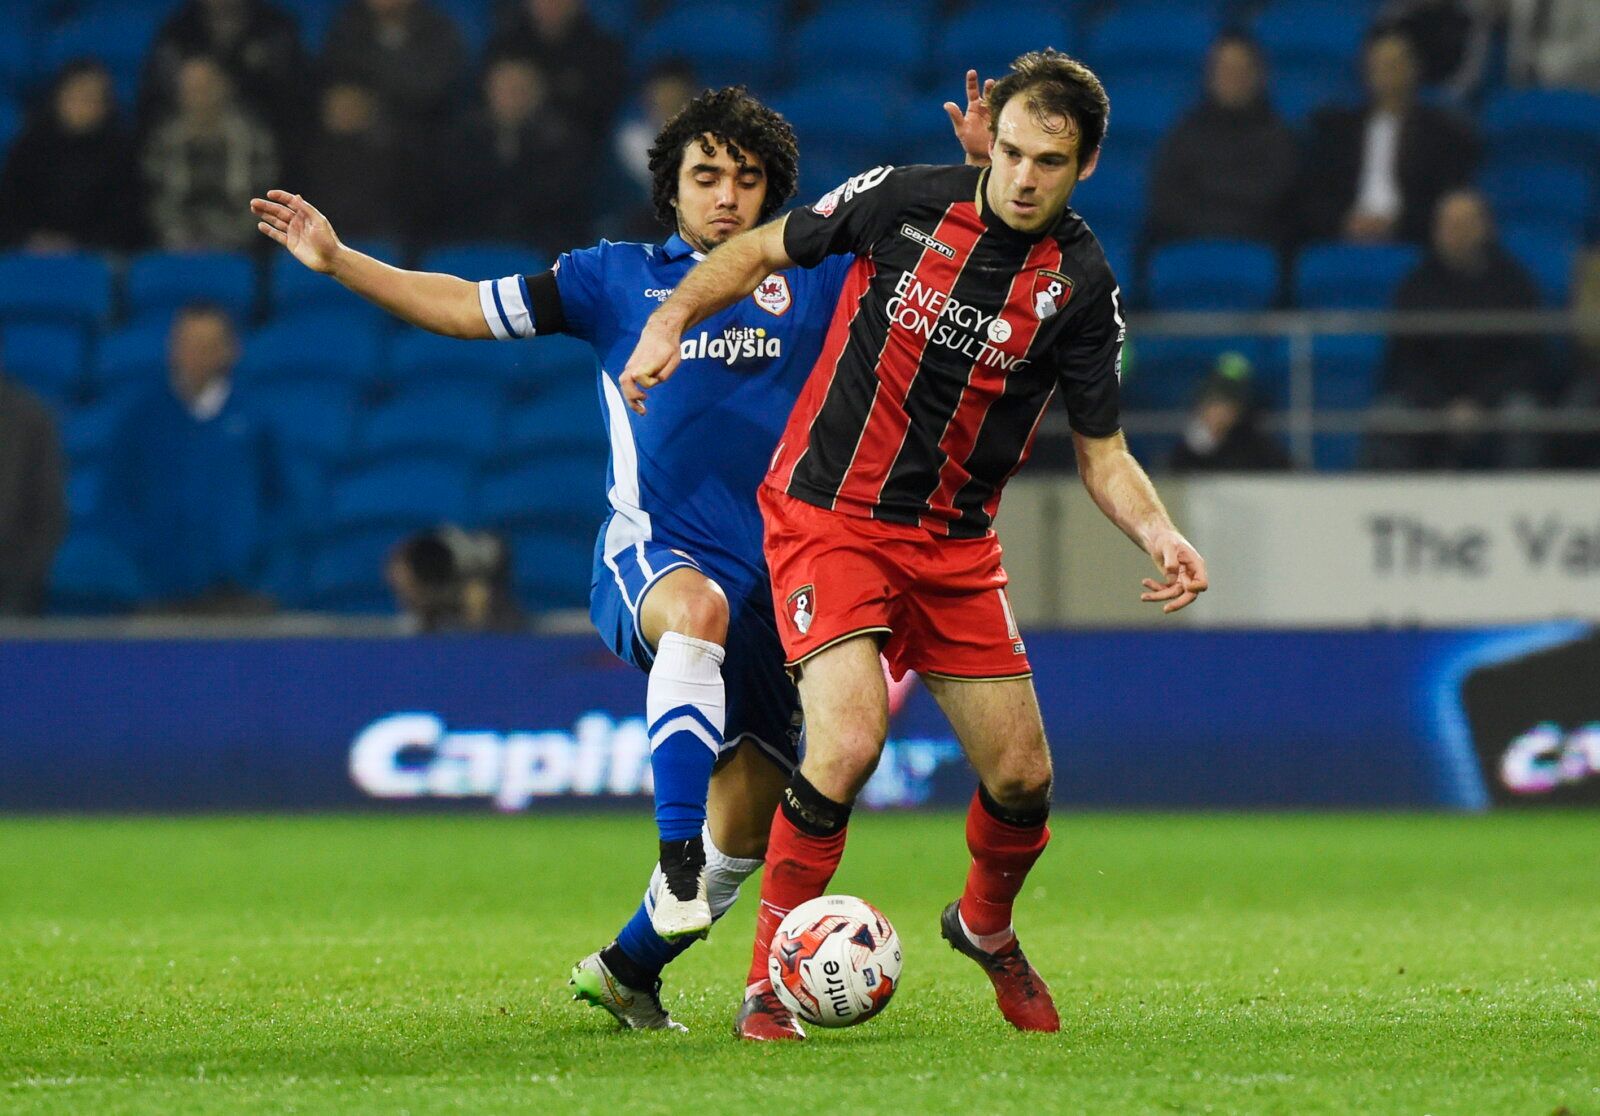 Football - Cardiff City v AFC Bournemouth - Sky Bet Football League Championship - Cardiff City Stadium - 14/15 - 17/3/15 
Cardiff City's Fabio Da Silva in action with Bournemouth's Brett Pitman 
Mandatory Credit: Action Images / Rebecca Naden 
EDITORIAL USE ONLY. No use with unauthorized audio, video, data, fixture lists, club/league logos or 